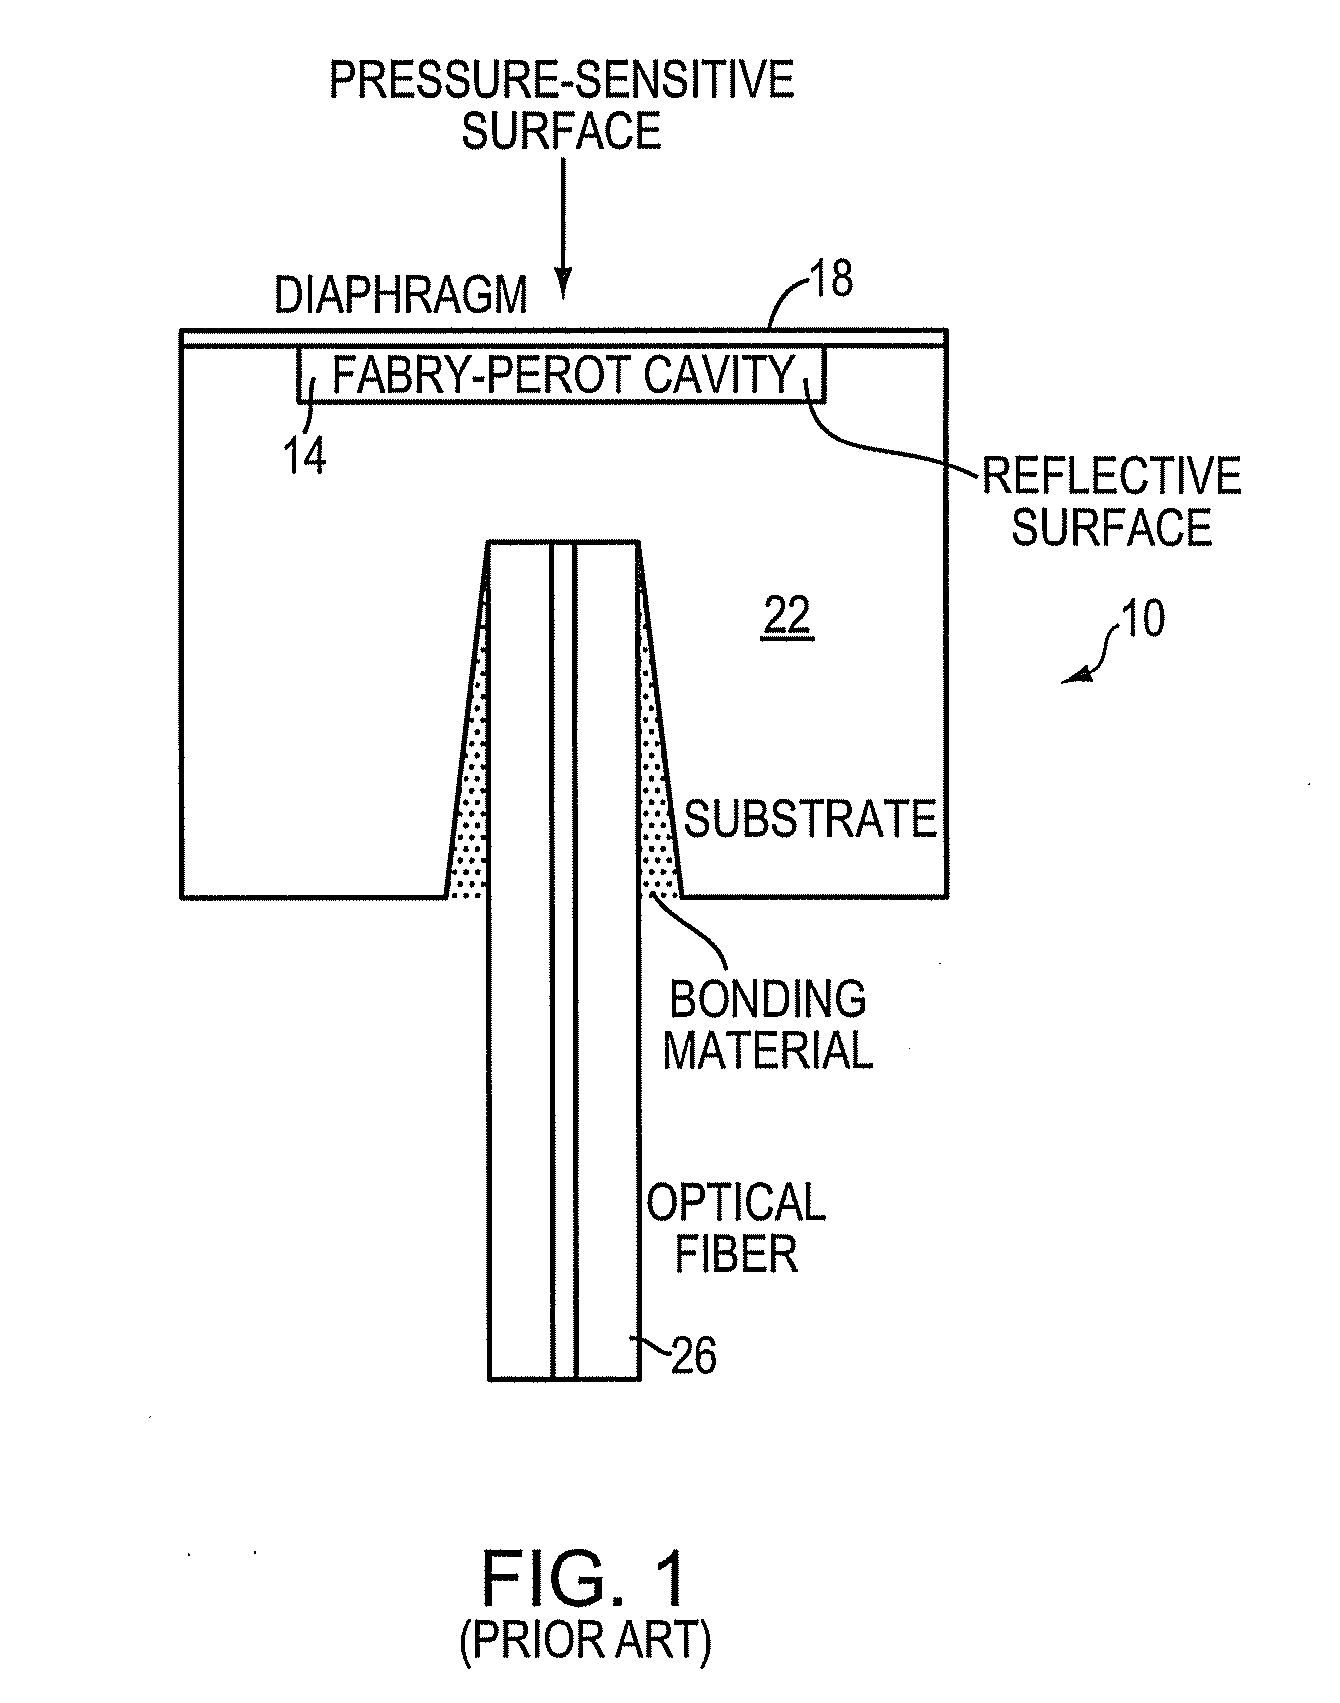 Intravascular optical coherence tomography system with pressure monitoring interface and accessories